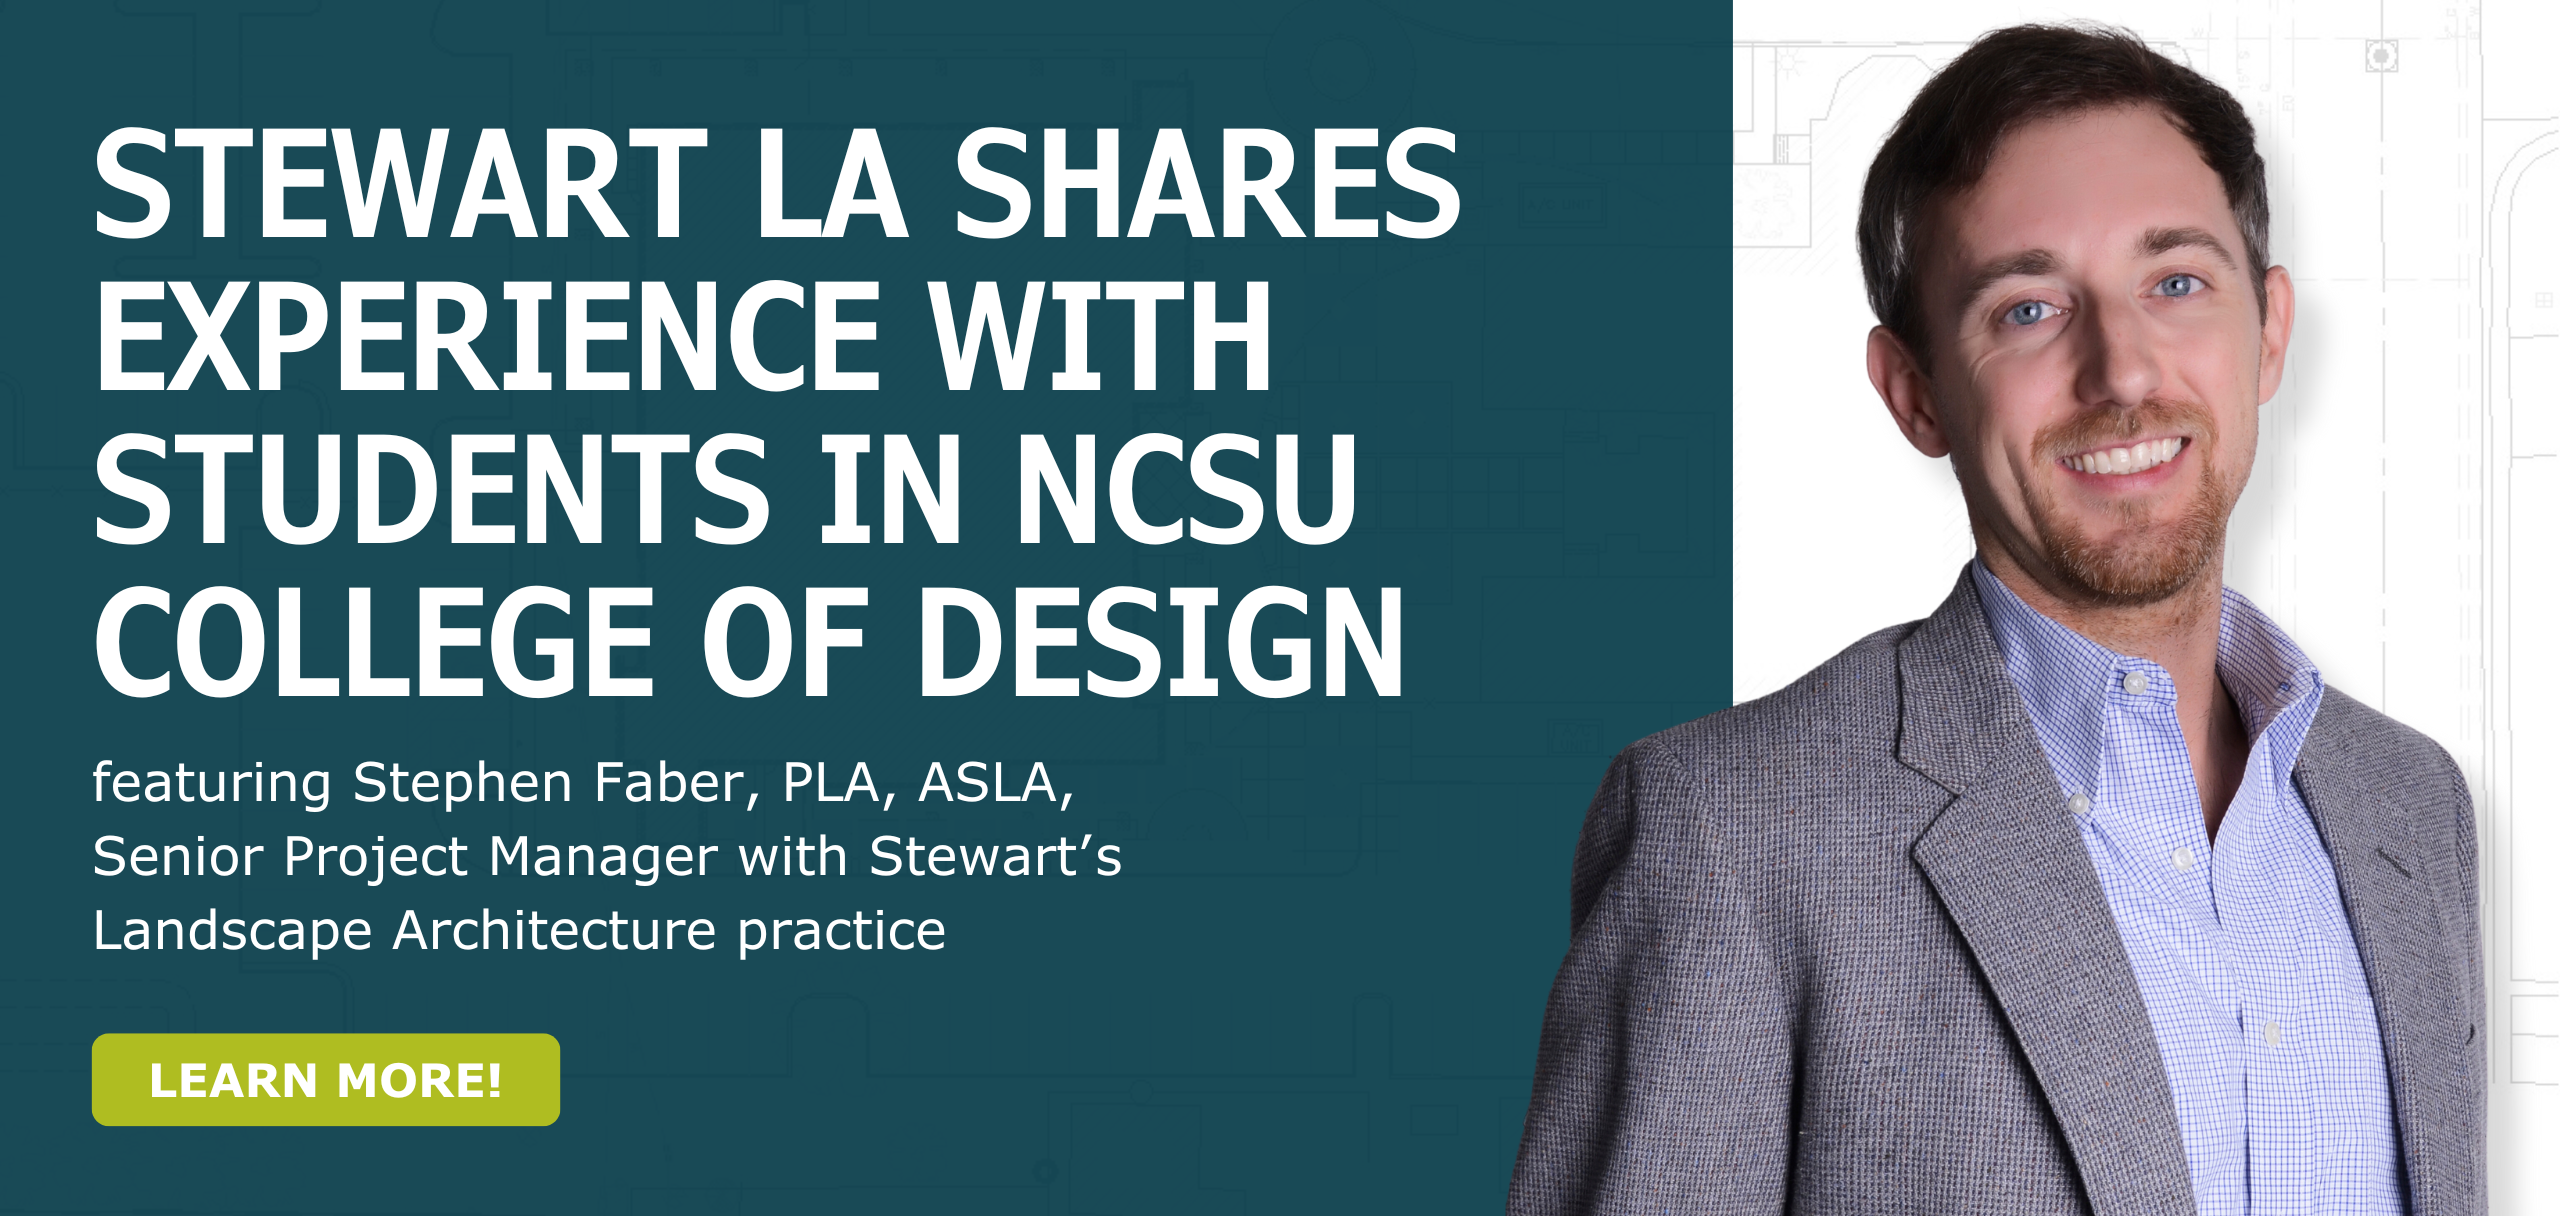 Stewart LA Shares Experience with Students in NCSU College of Design